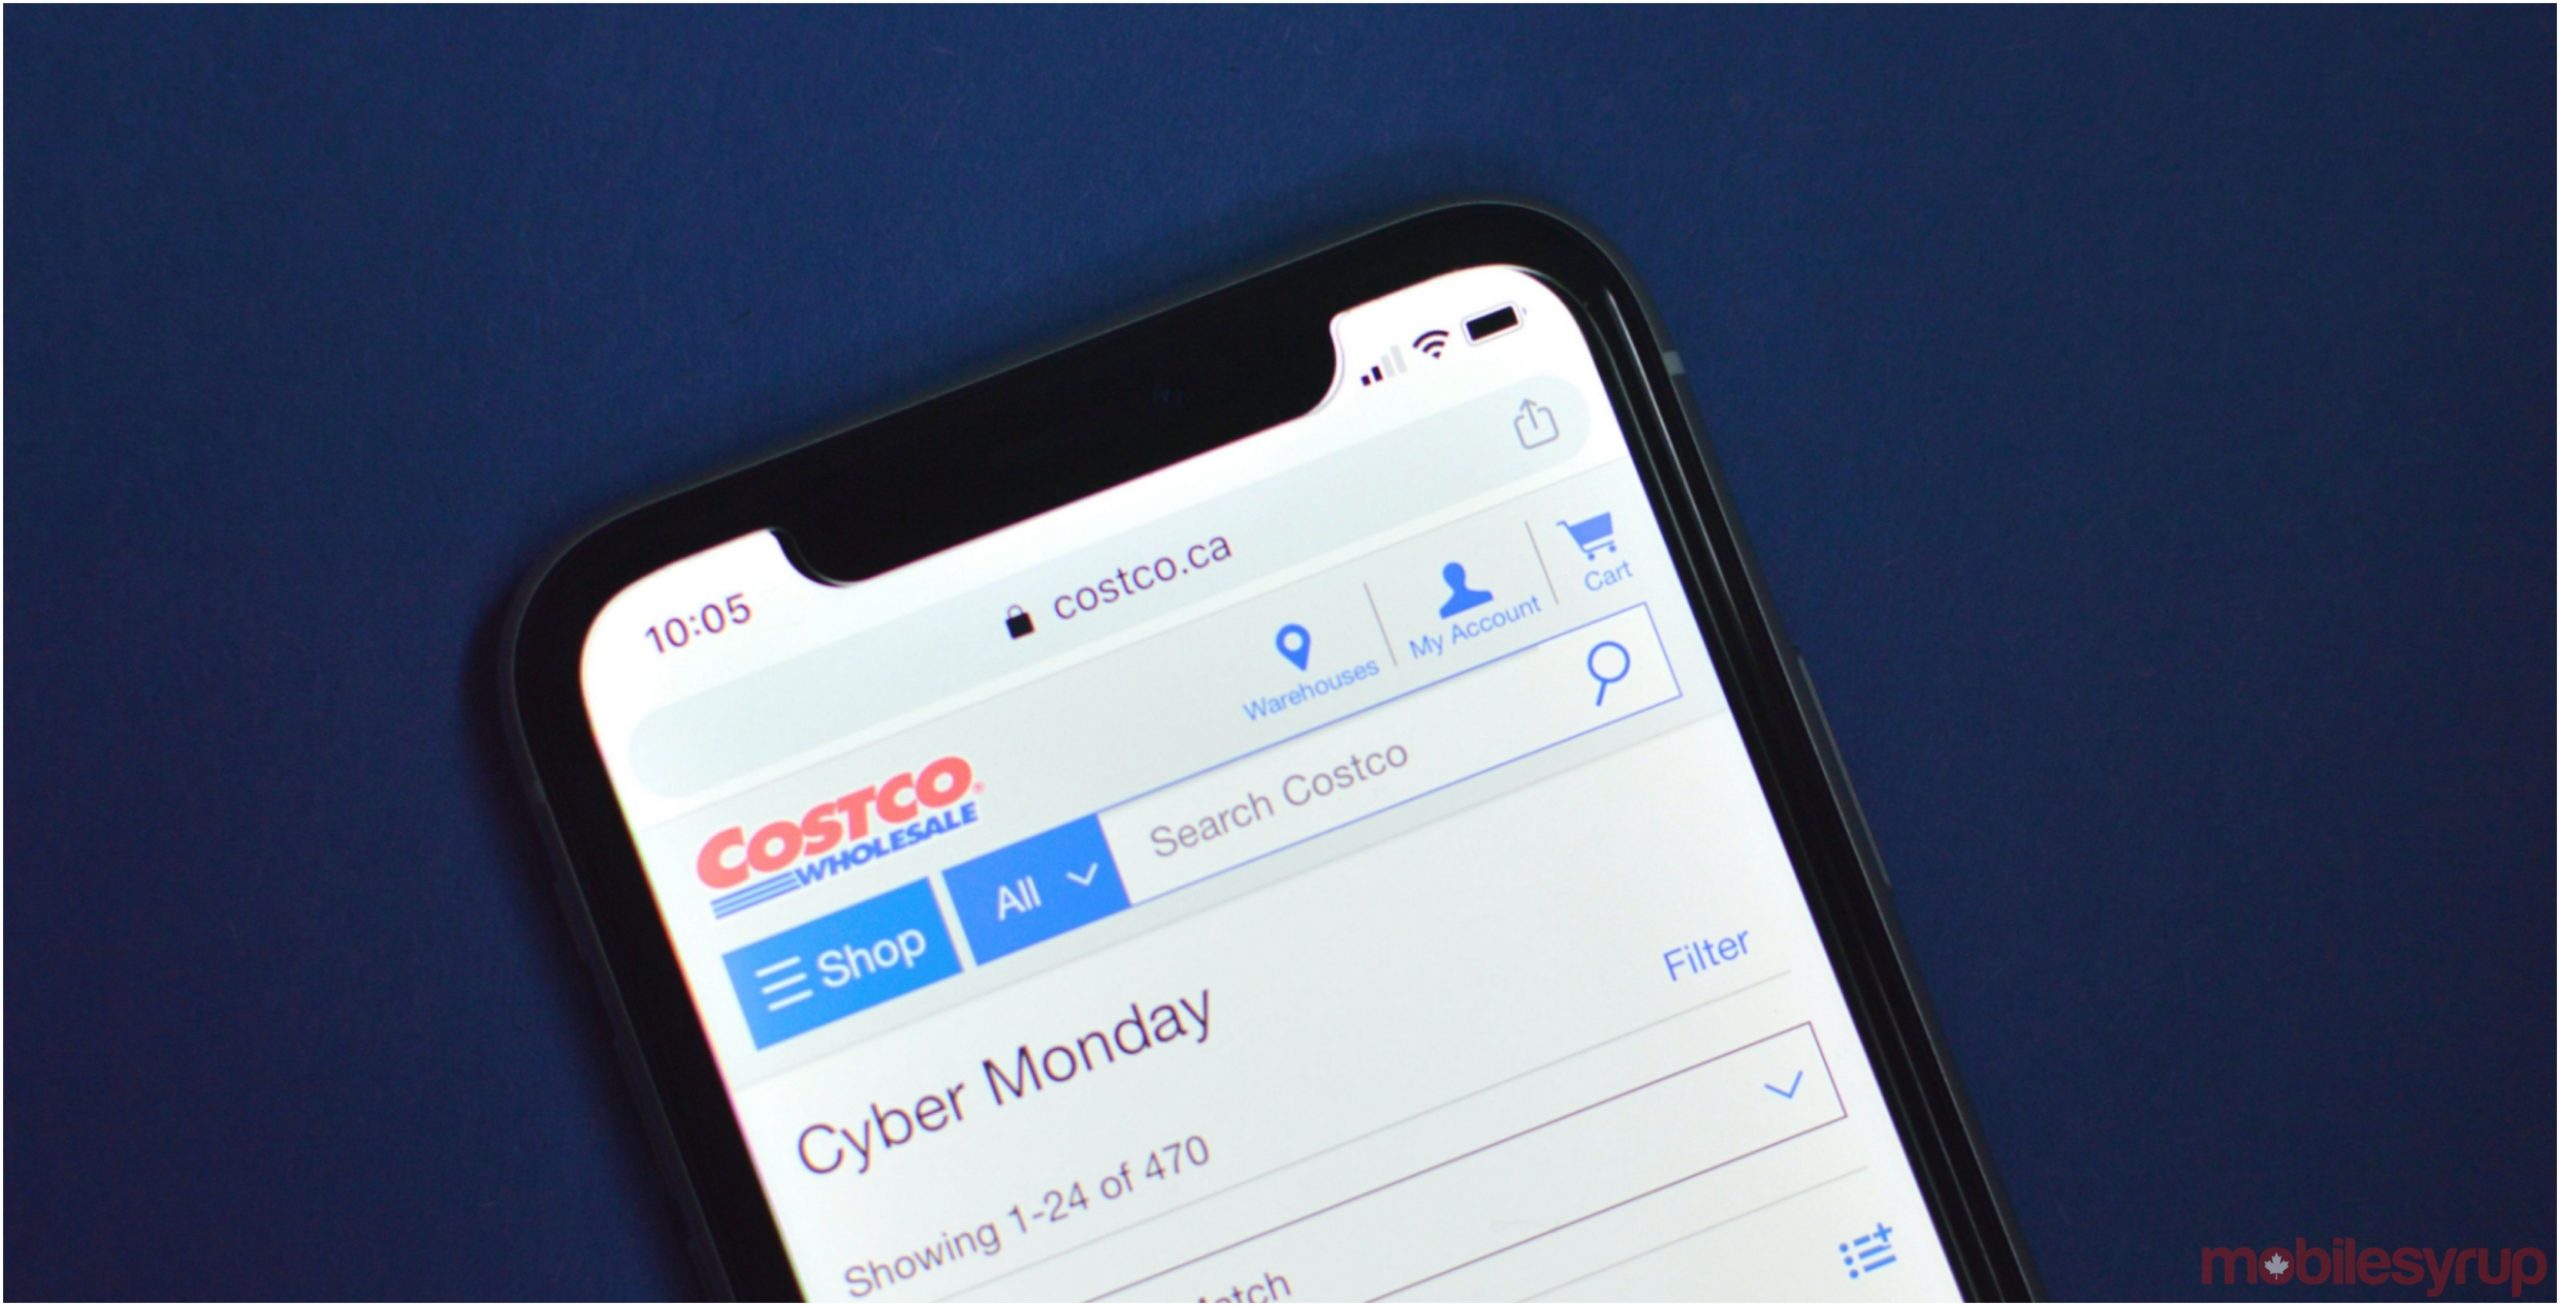 8 Hacks for Cyber Monday Shopping on Your Phone